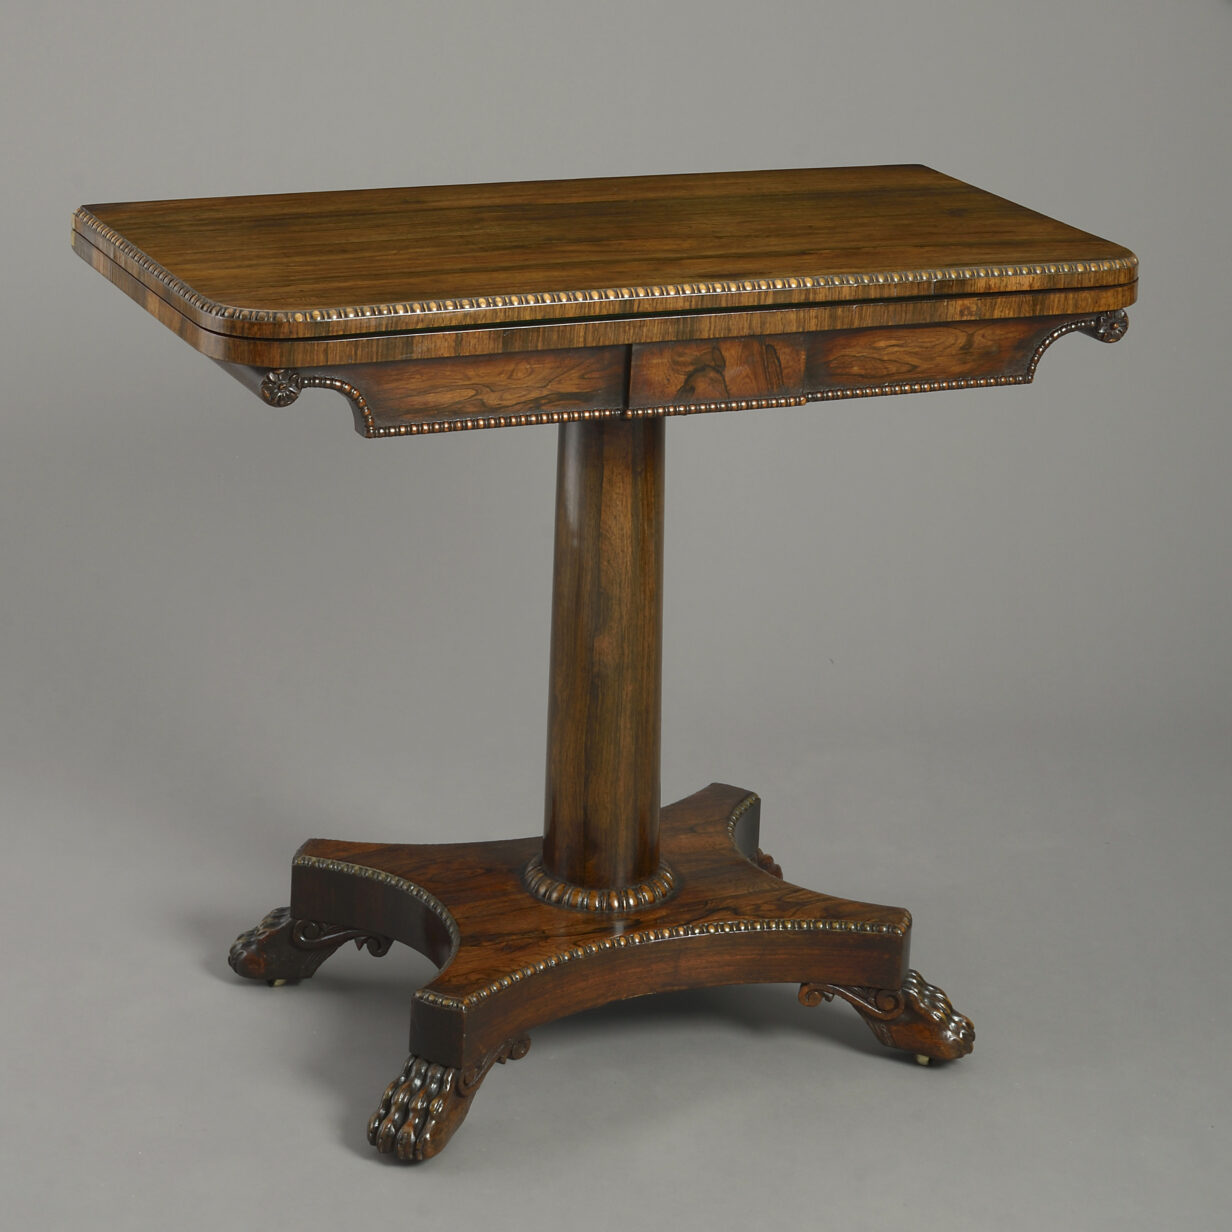 Pair of early 19th century regency period rosewood card tables